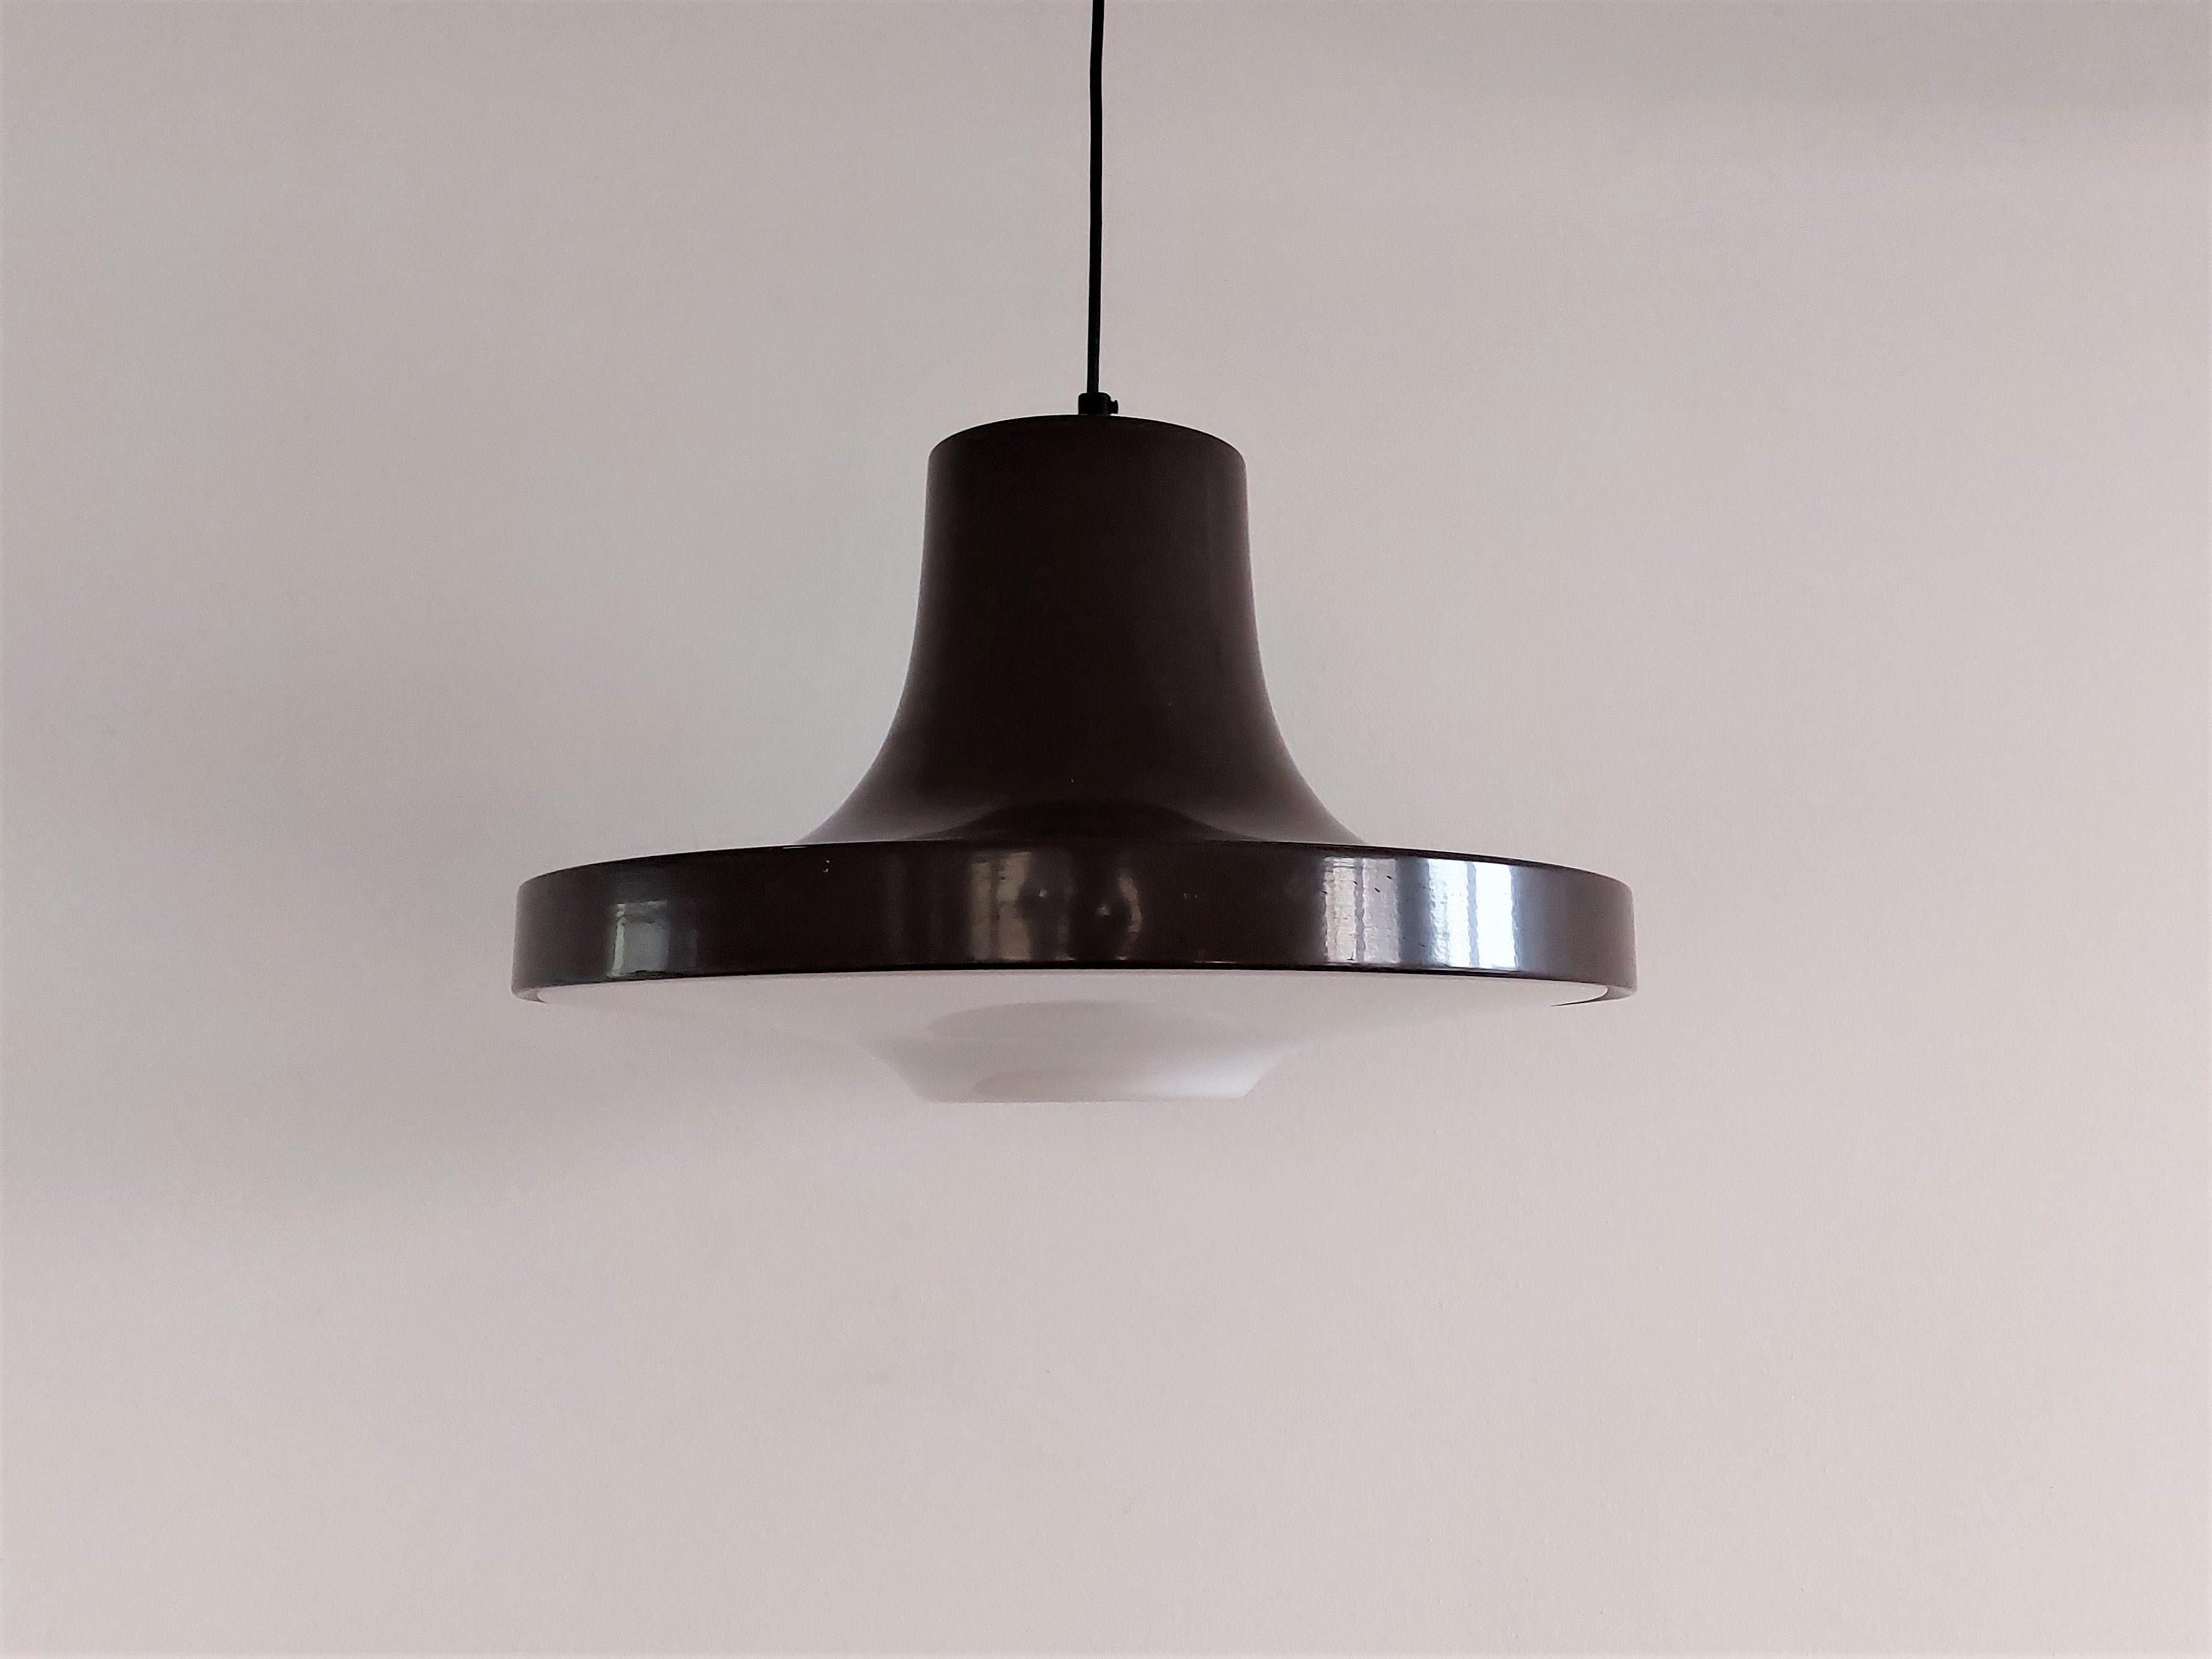 This pendant lamp, model 54070, was made by the Swedish manufacturer Ab Fagerhult in the late 1960's, earlier 1970's. It has a brown metal shade   with a perspex diffuser that gives a nice and soft light. This light is labelled in its ceiling cap.